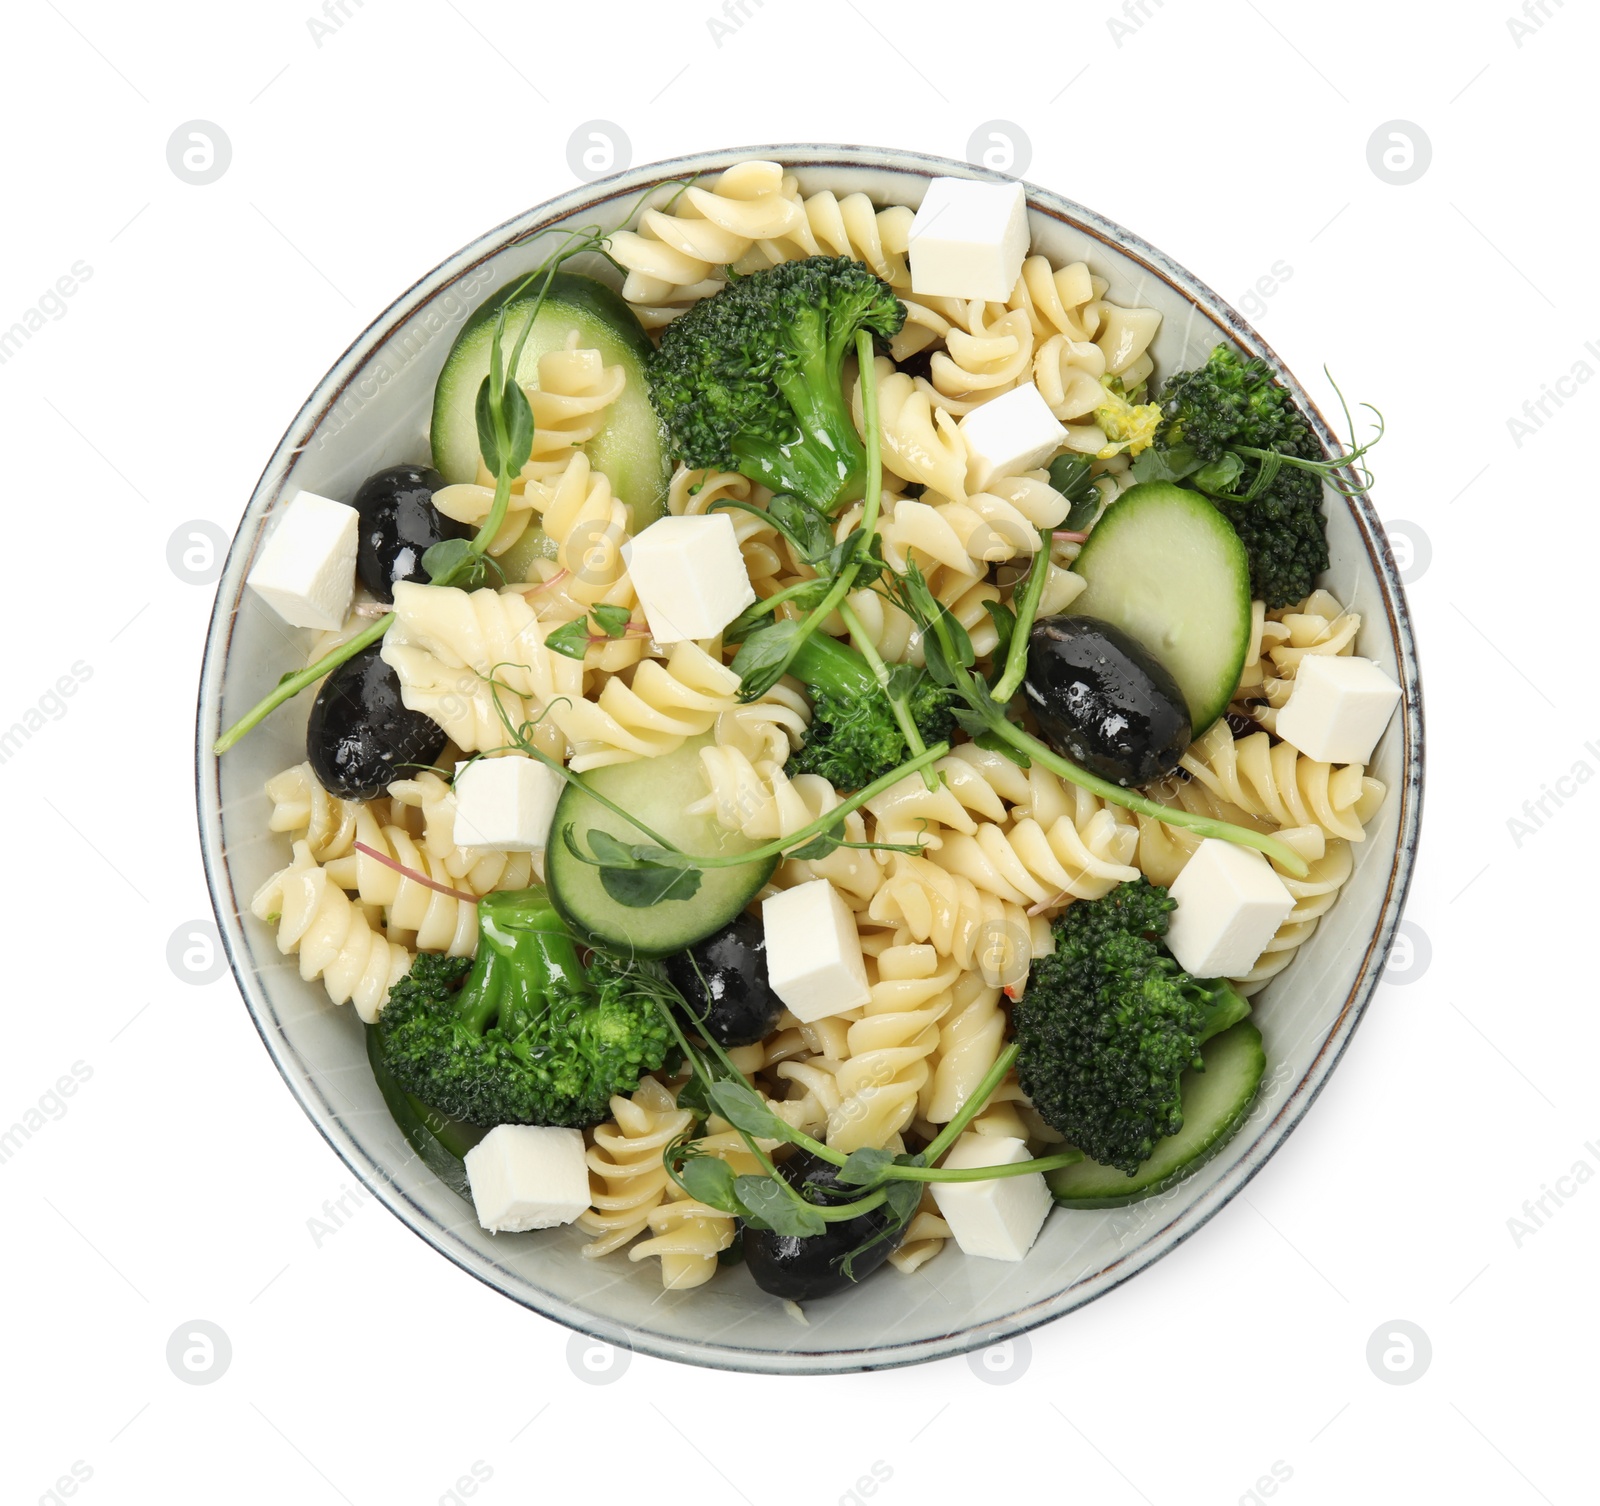 Photo of Bowl of delicious pasta with cucumber, olives, broccoli and cheese on white background, top view